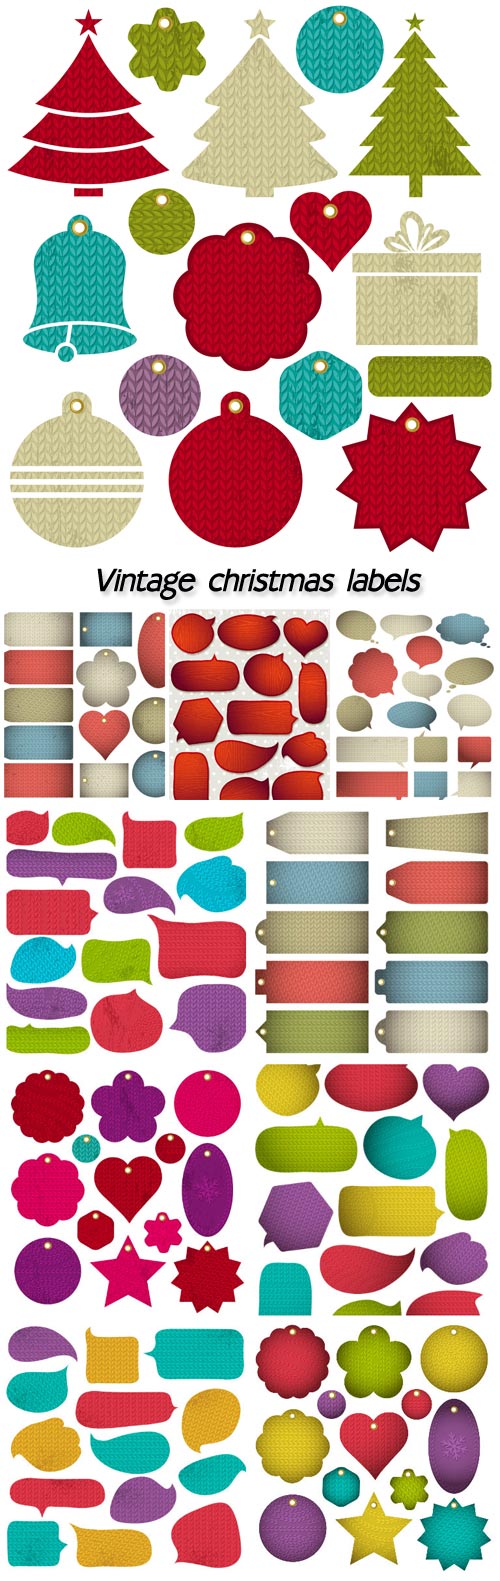 Vintage christmas labels with pattern of stitch, vector